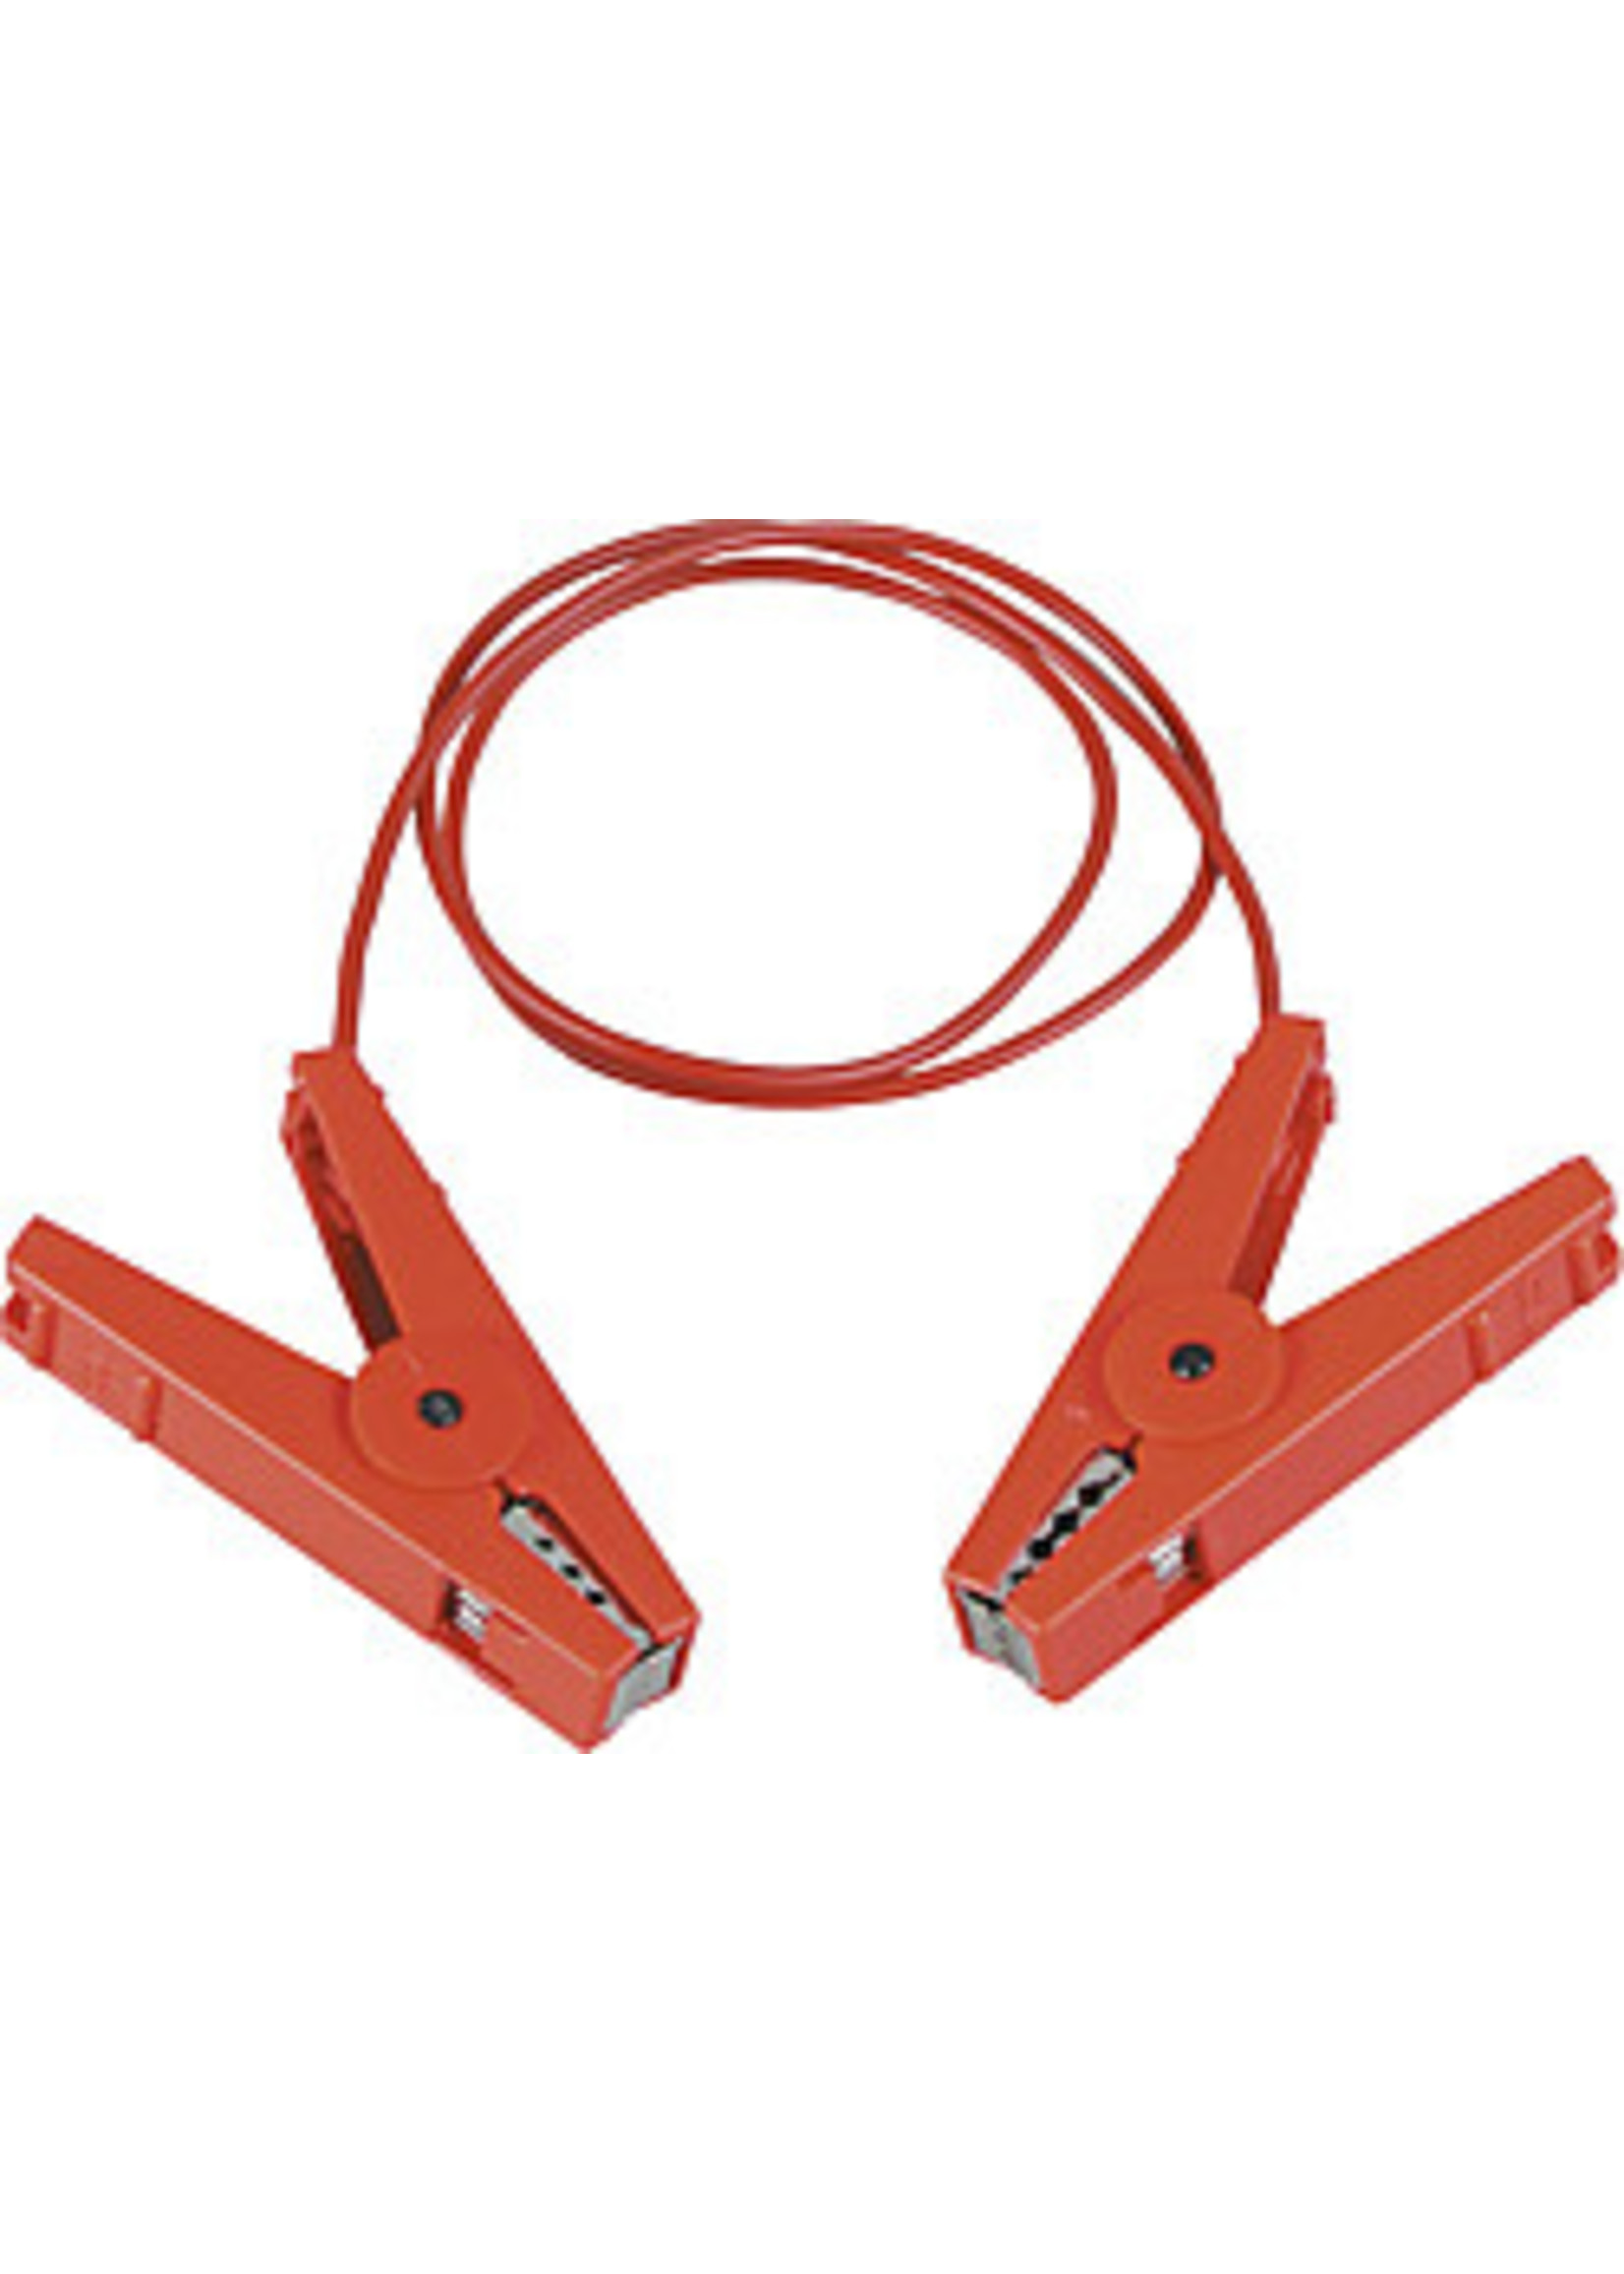 Connecting cable, 3-wire (2pcs)